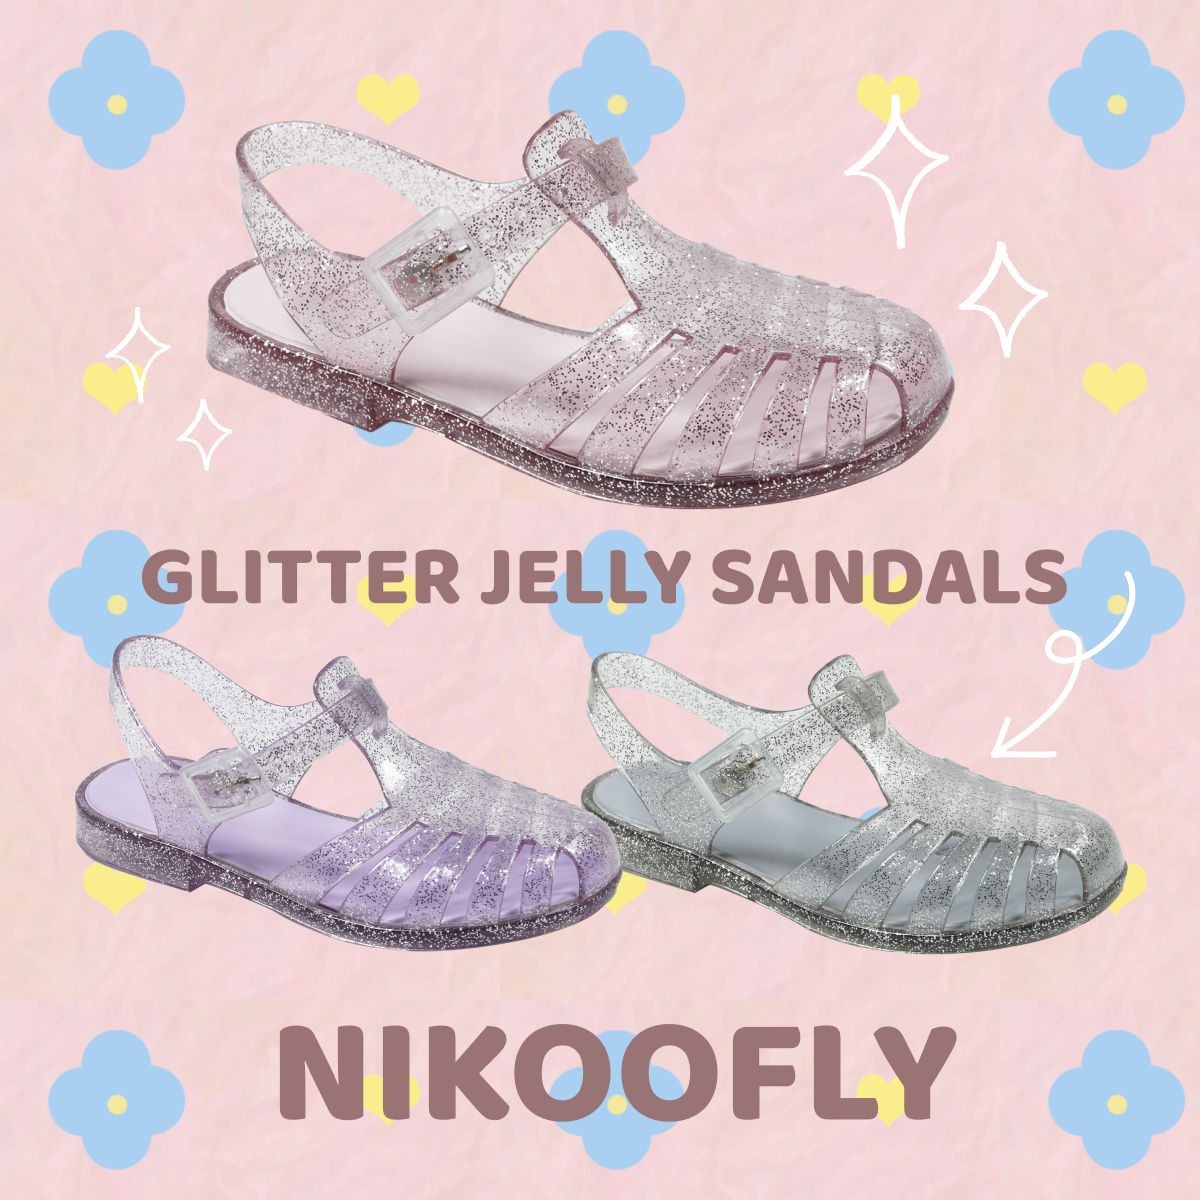 Nice-quality-Glitter-Jelly-Sandals-Water-Resistant-Flat-Sandals-MS2022-8-nikoofly-shantou-yidaxing